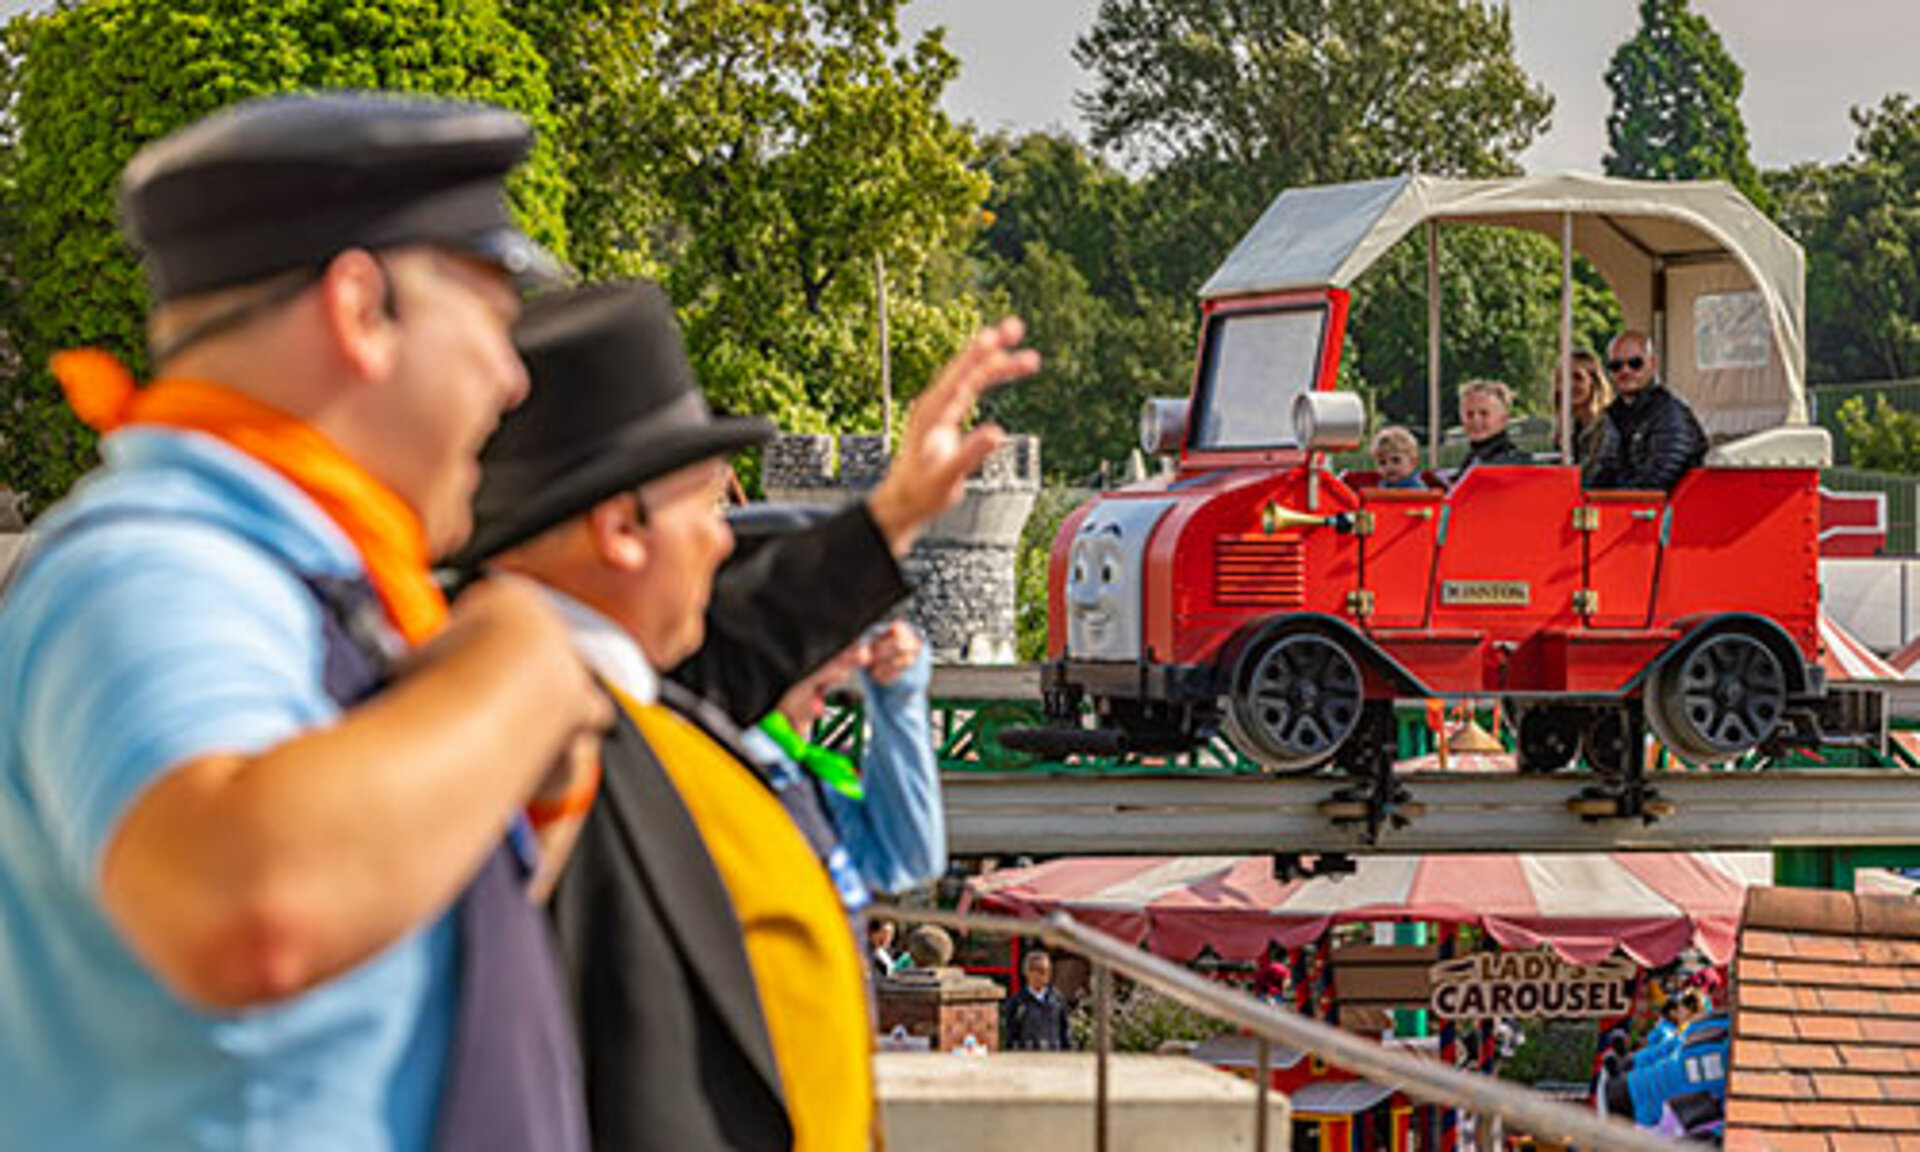 Sir Topham Hat waving to guests on Winstons